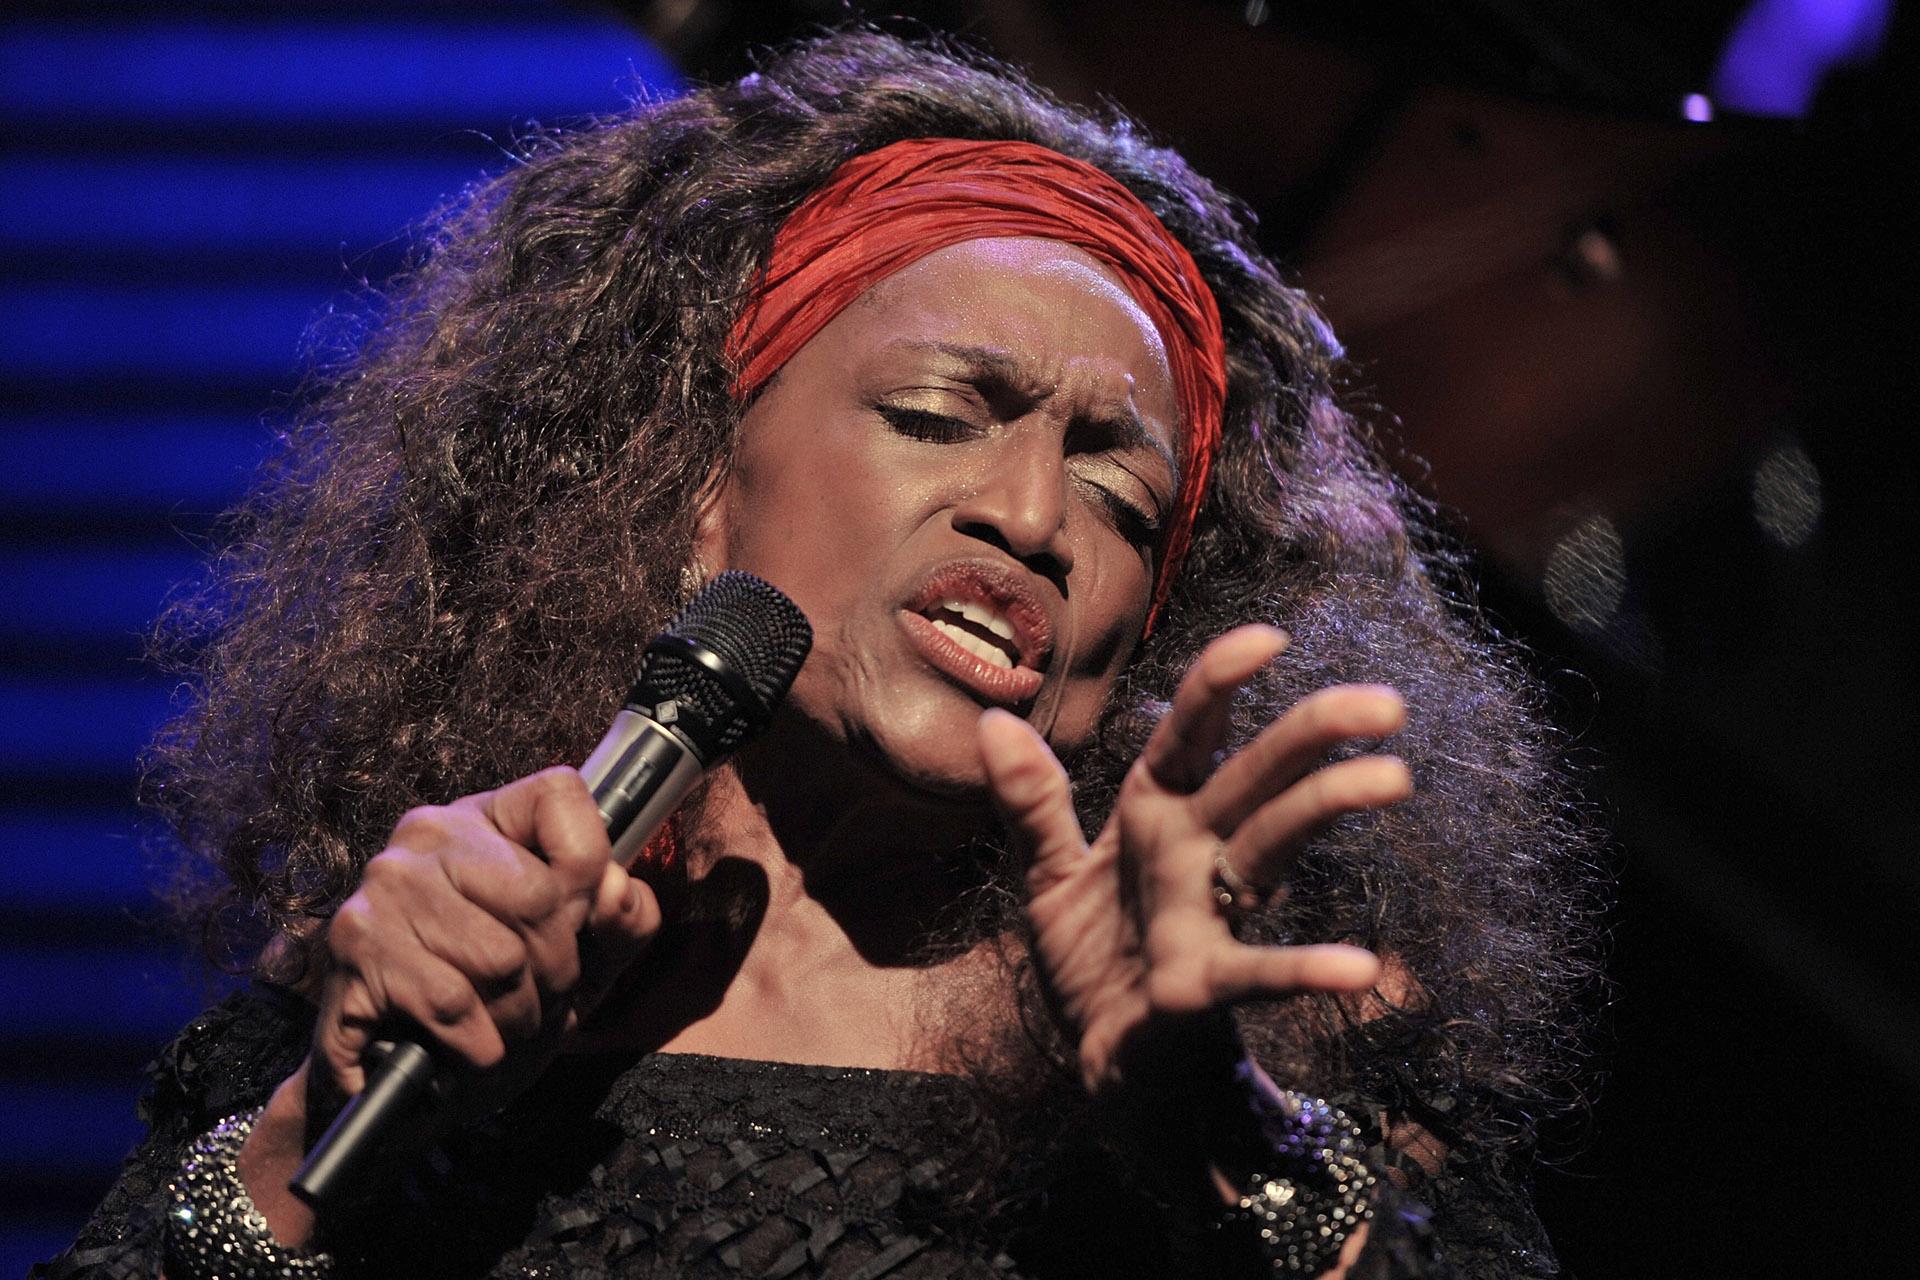 This July 4, 2010 file photo shows American opera singer Jessye Norman performing on the Stravinski Hall stage at the 44th Montreux Jazz Festival, in Montreux, Switzerland. (AP Photo / Keystone / Dominic Favre, File)